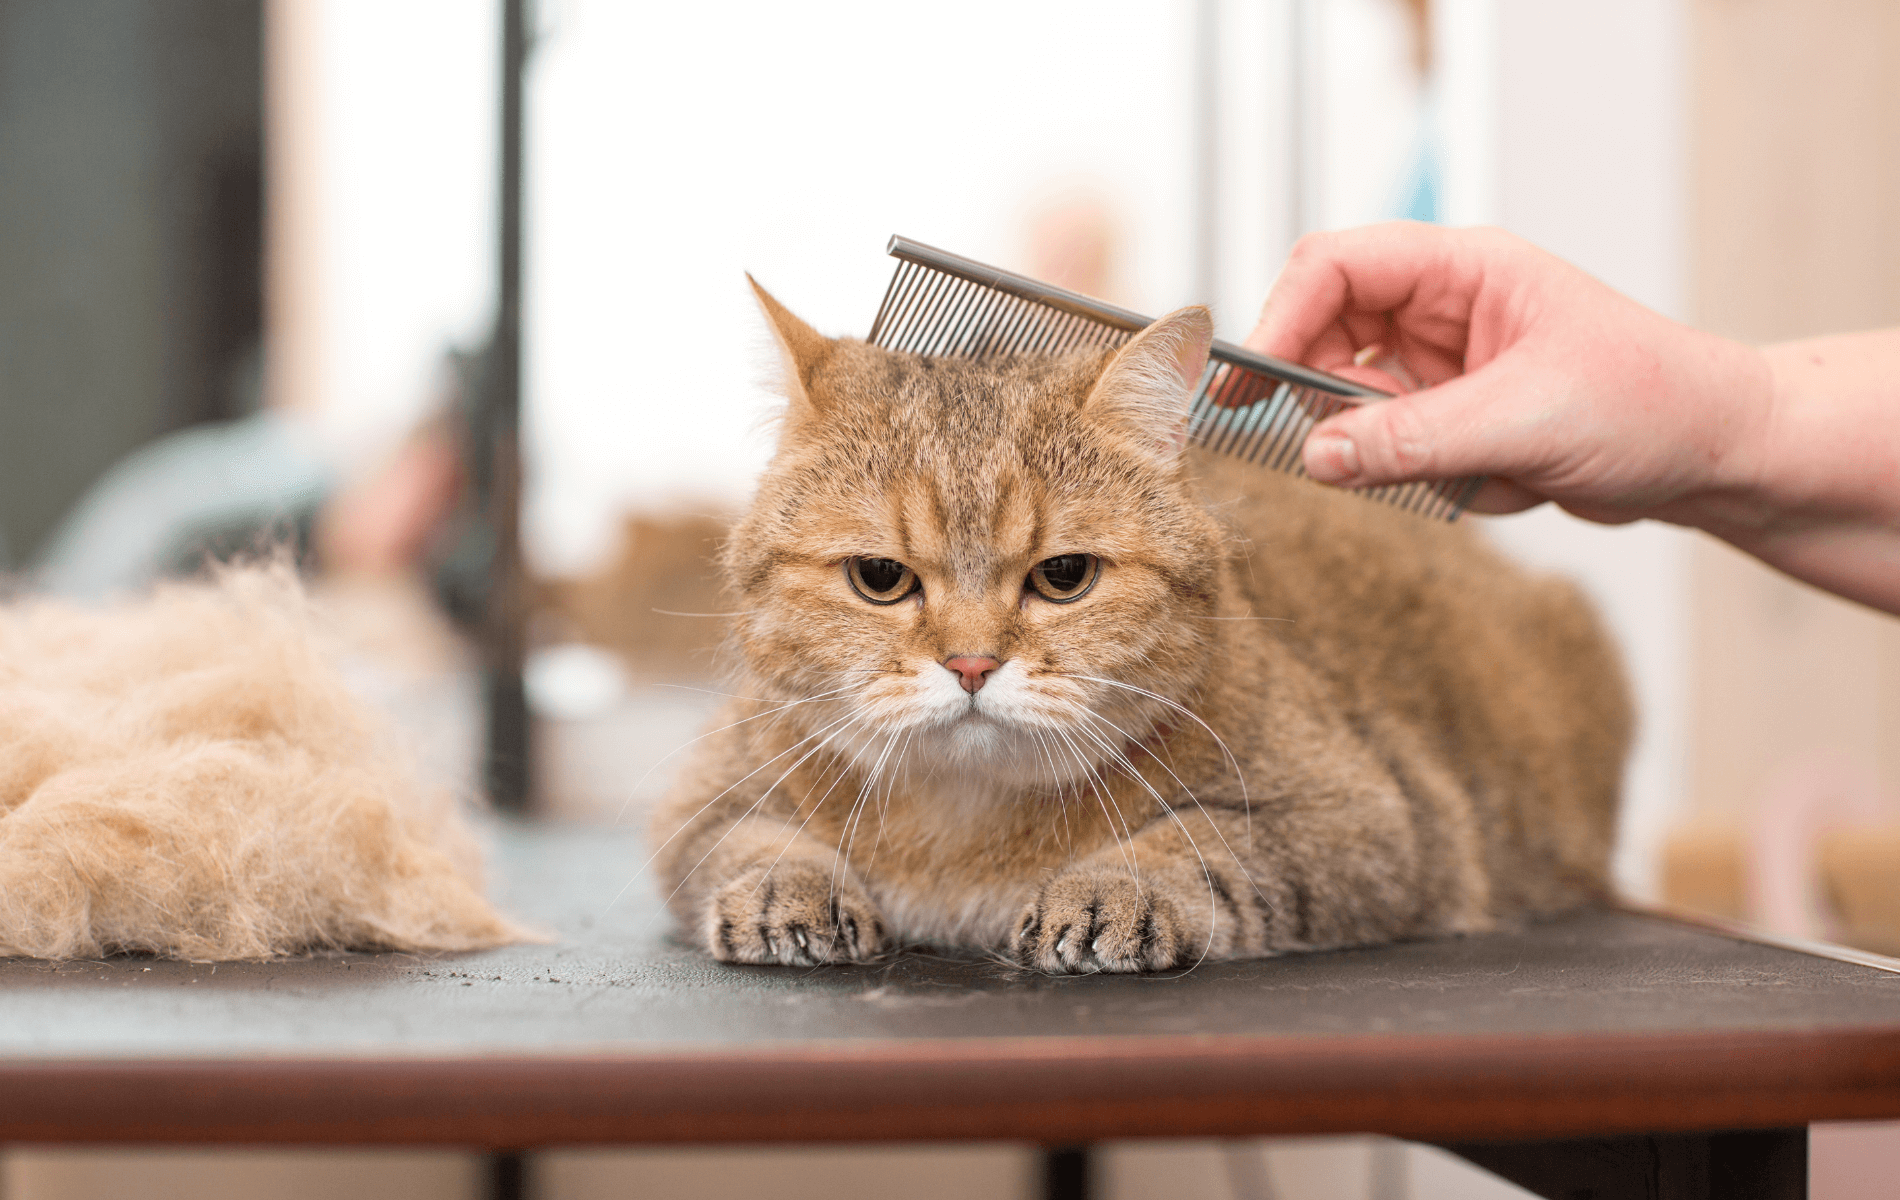 A hand combing a cat